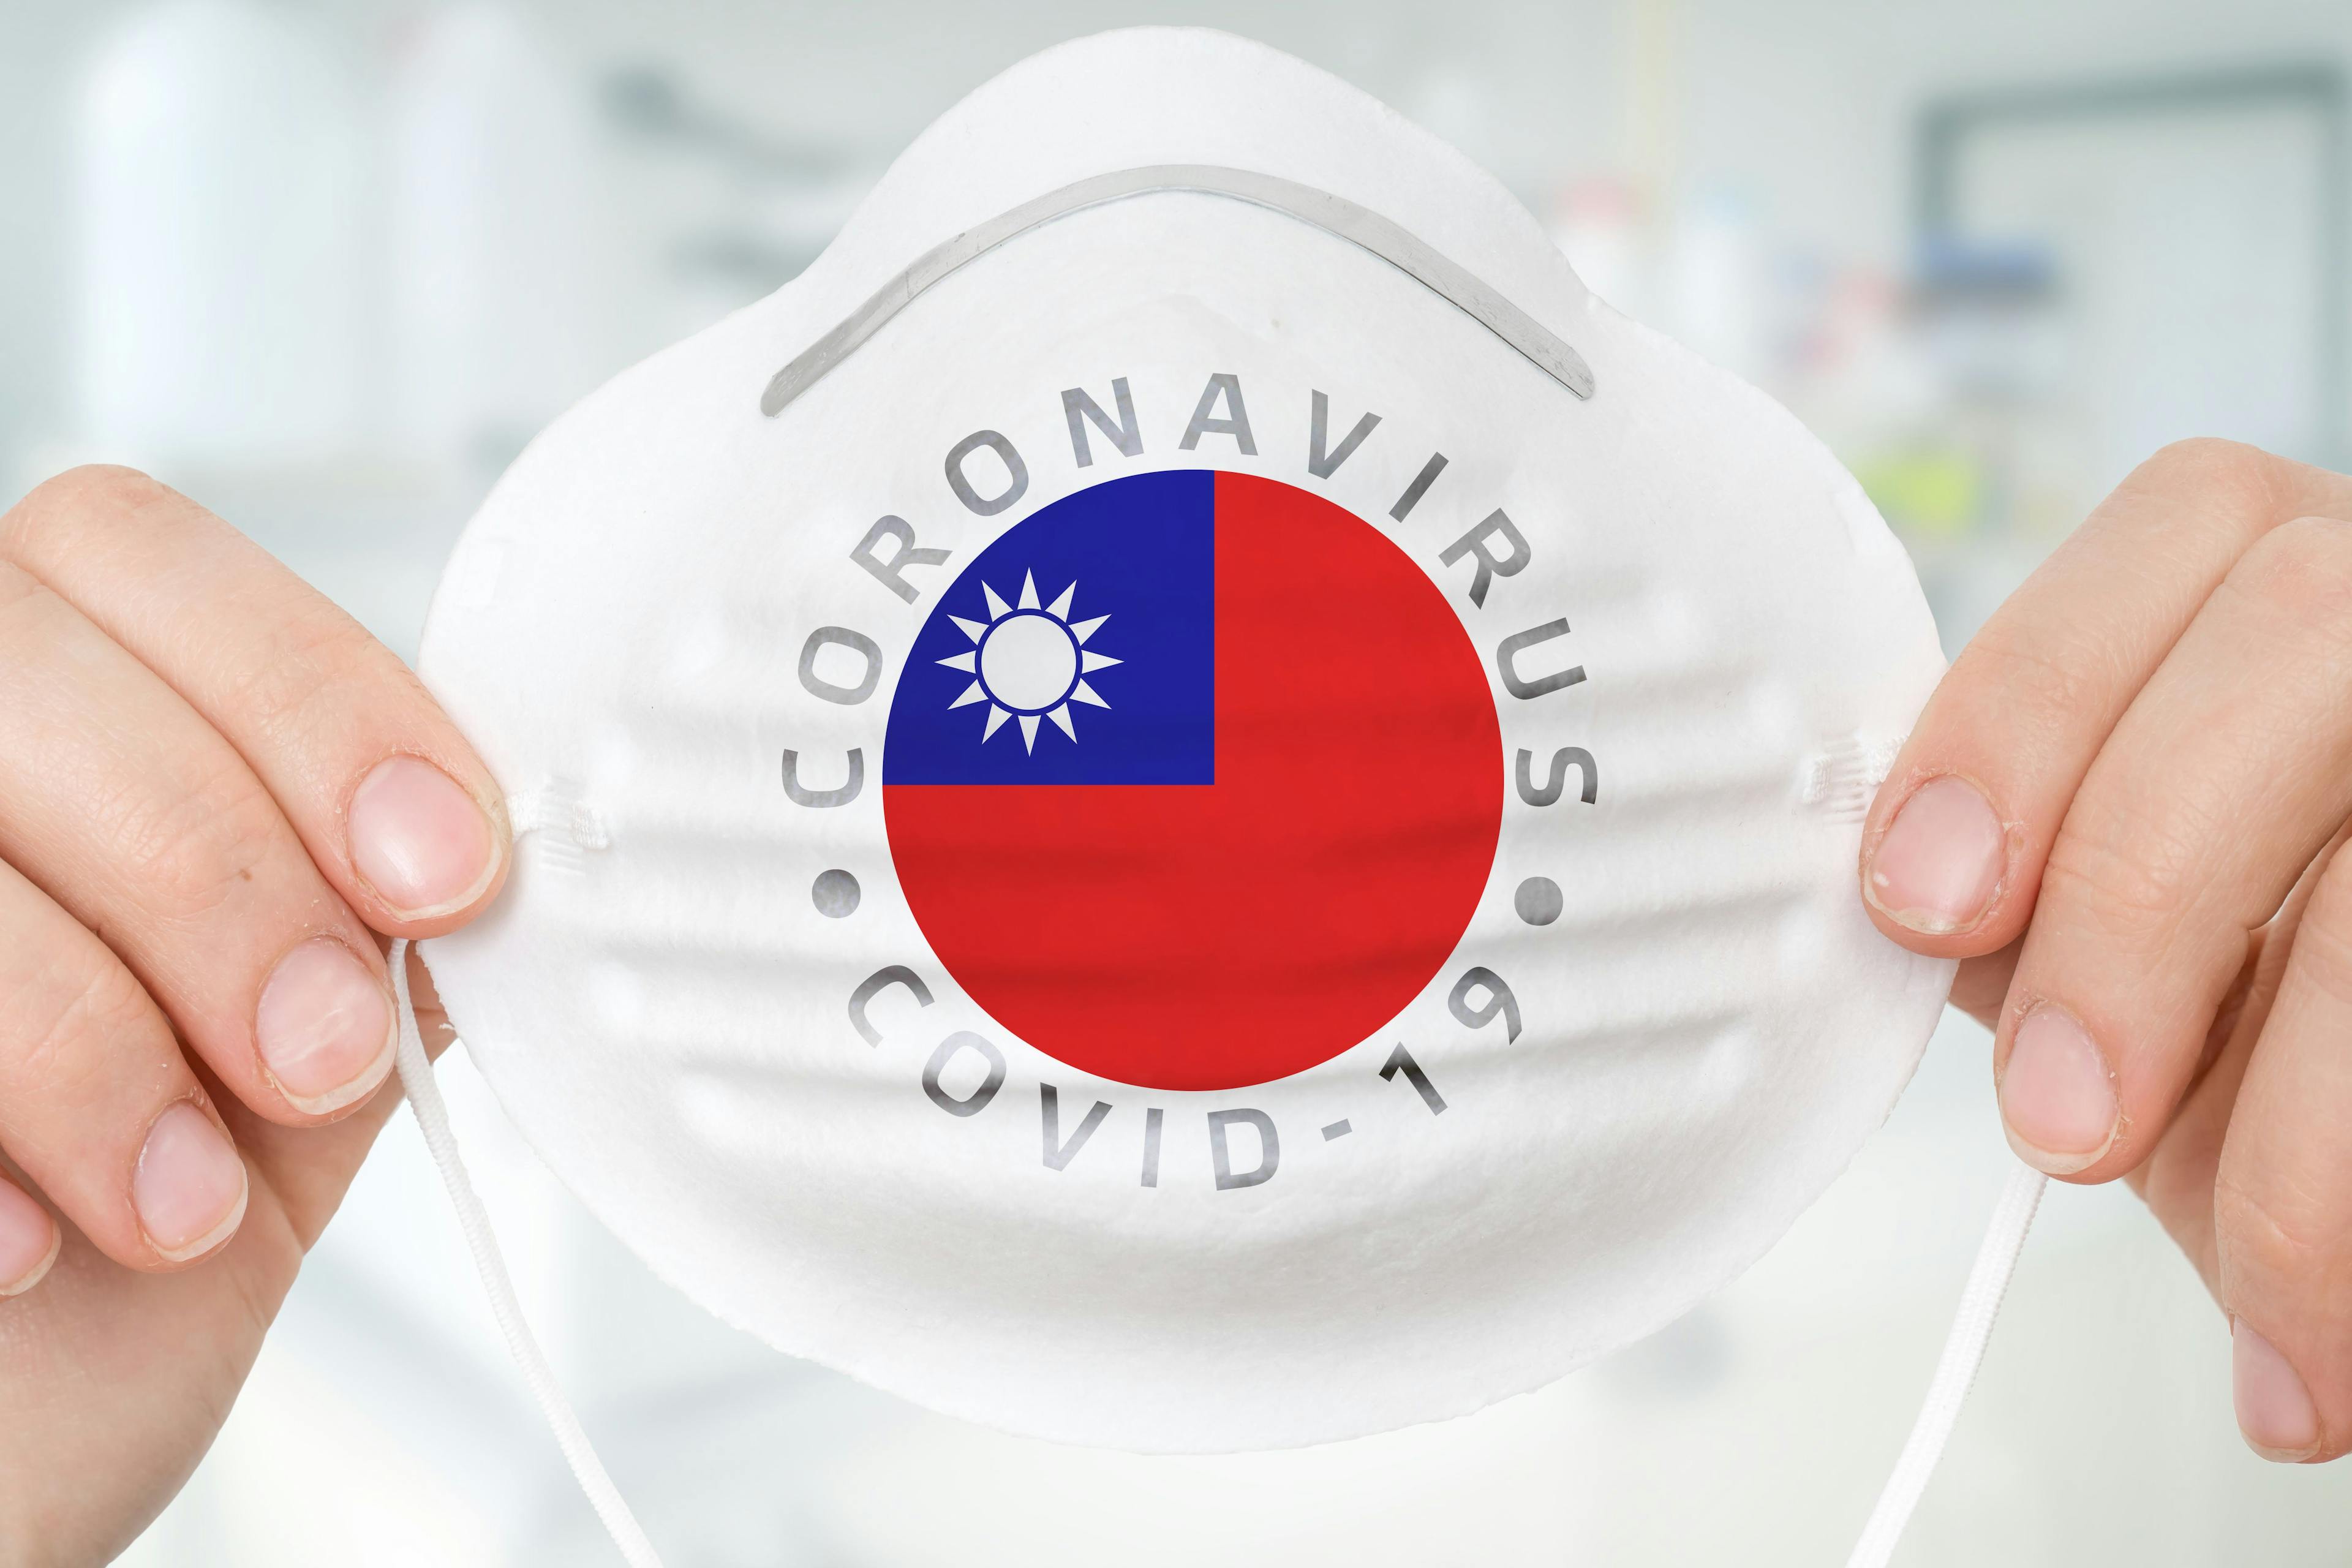 The Taiwan Example: Community Pharmacists Helped Keep COVID-19 Deaths, Cases Way Down